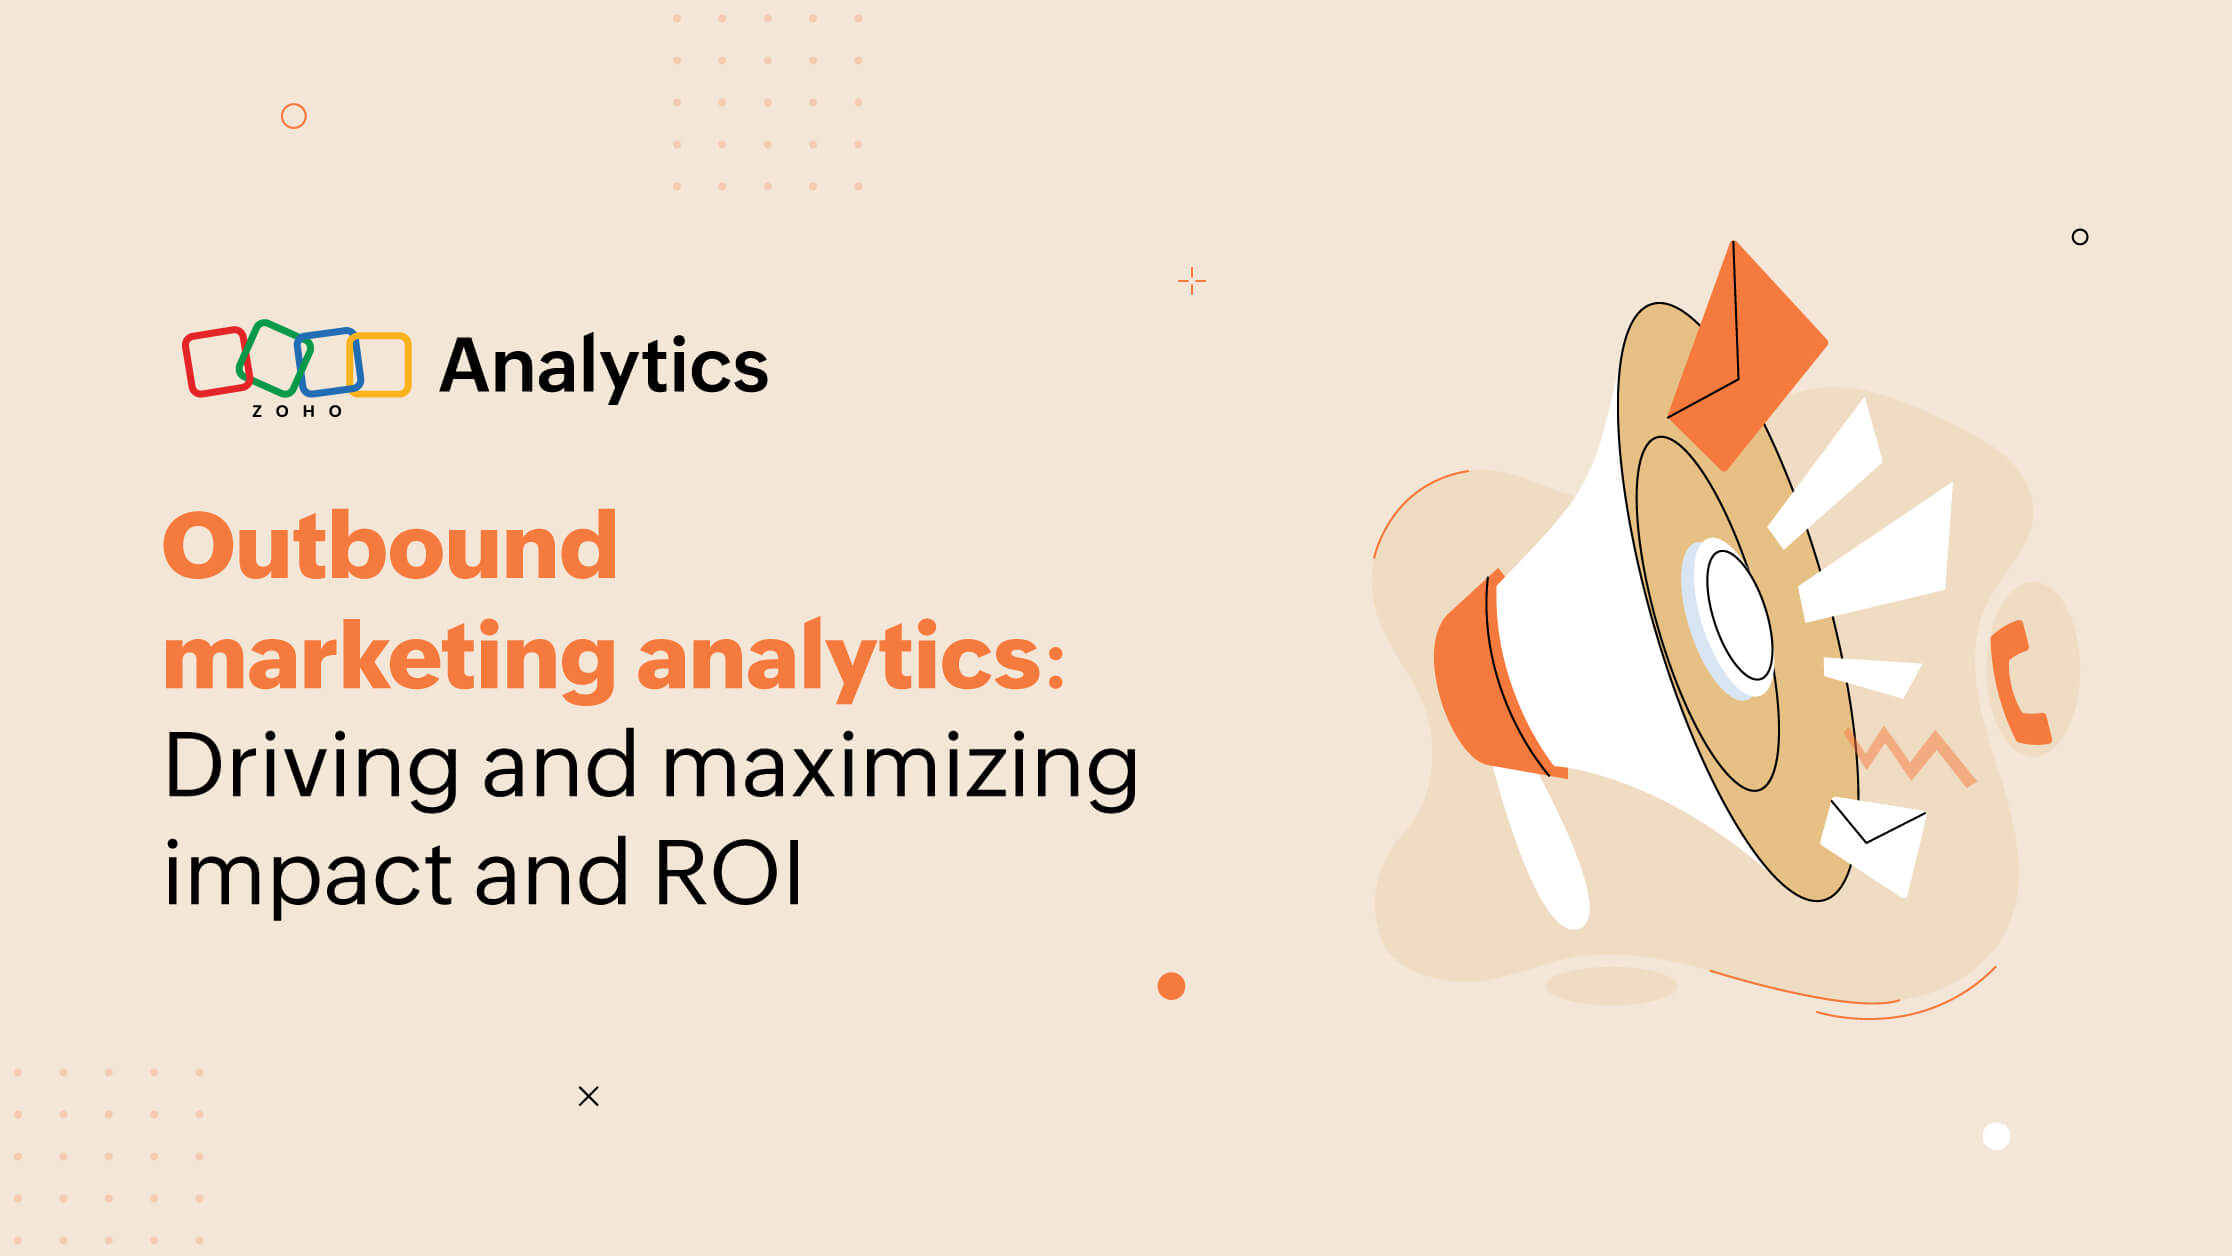 Outbound marketing analytics: Driving and maximizing impact and ROI